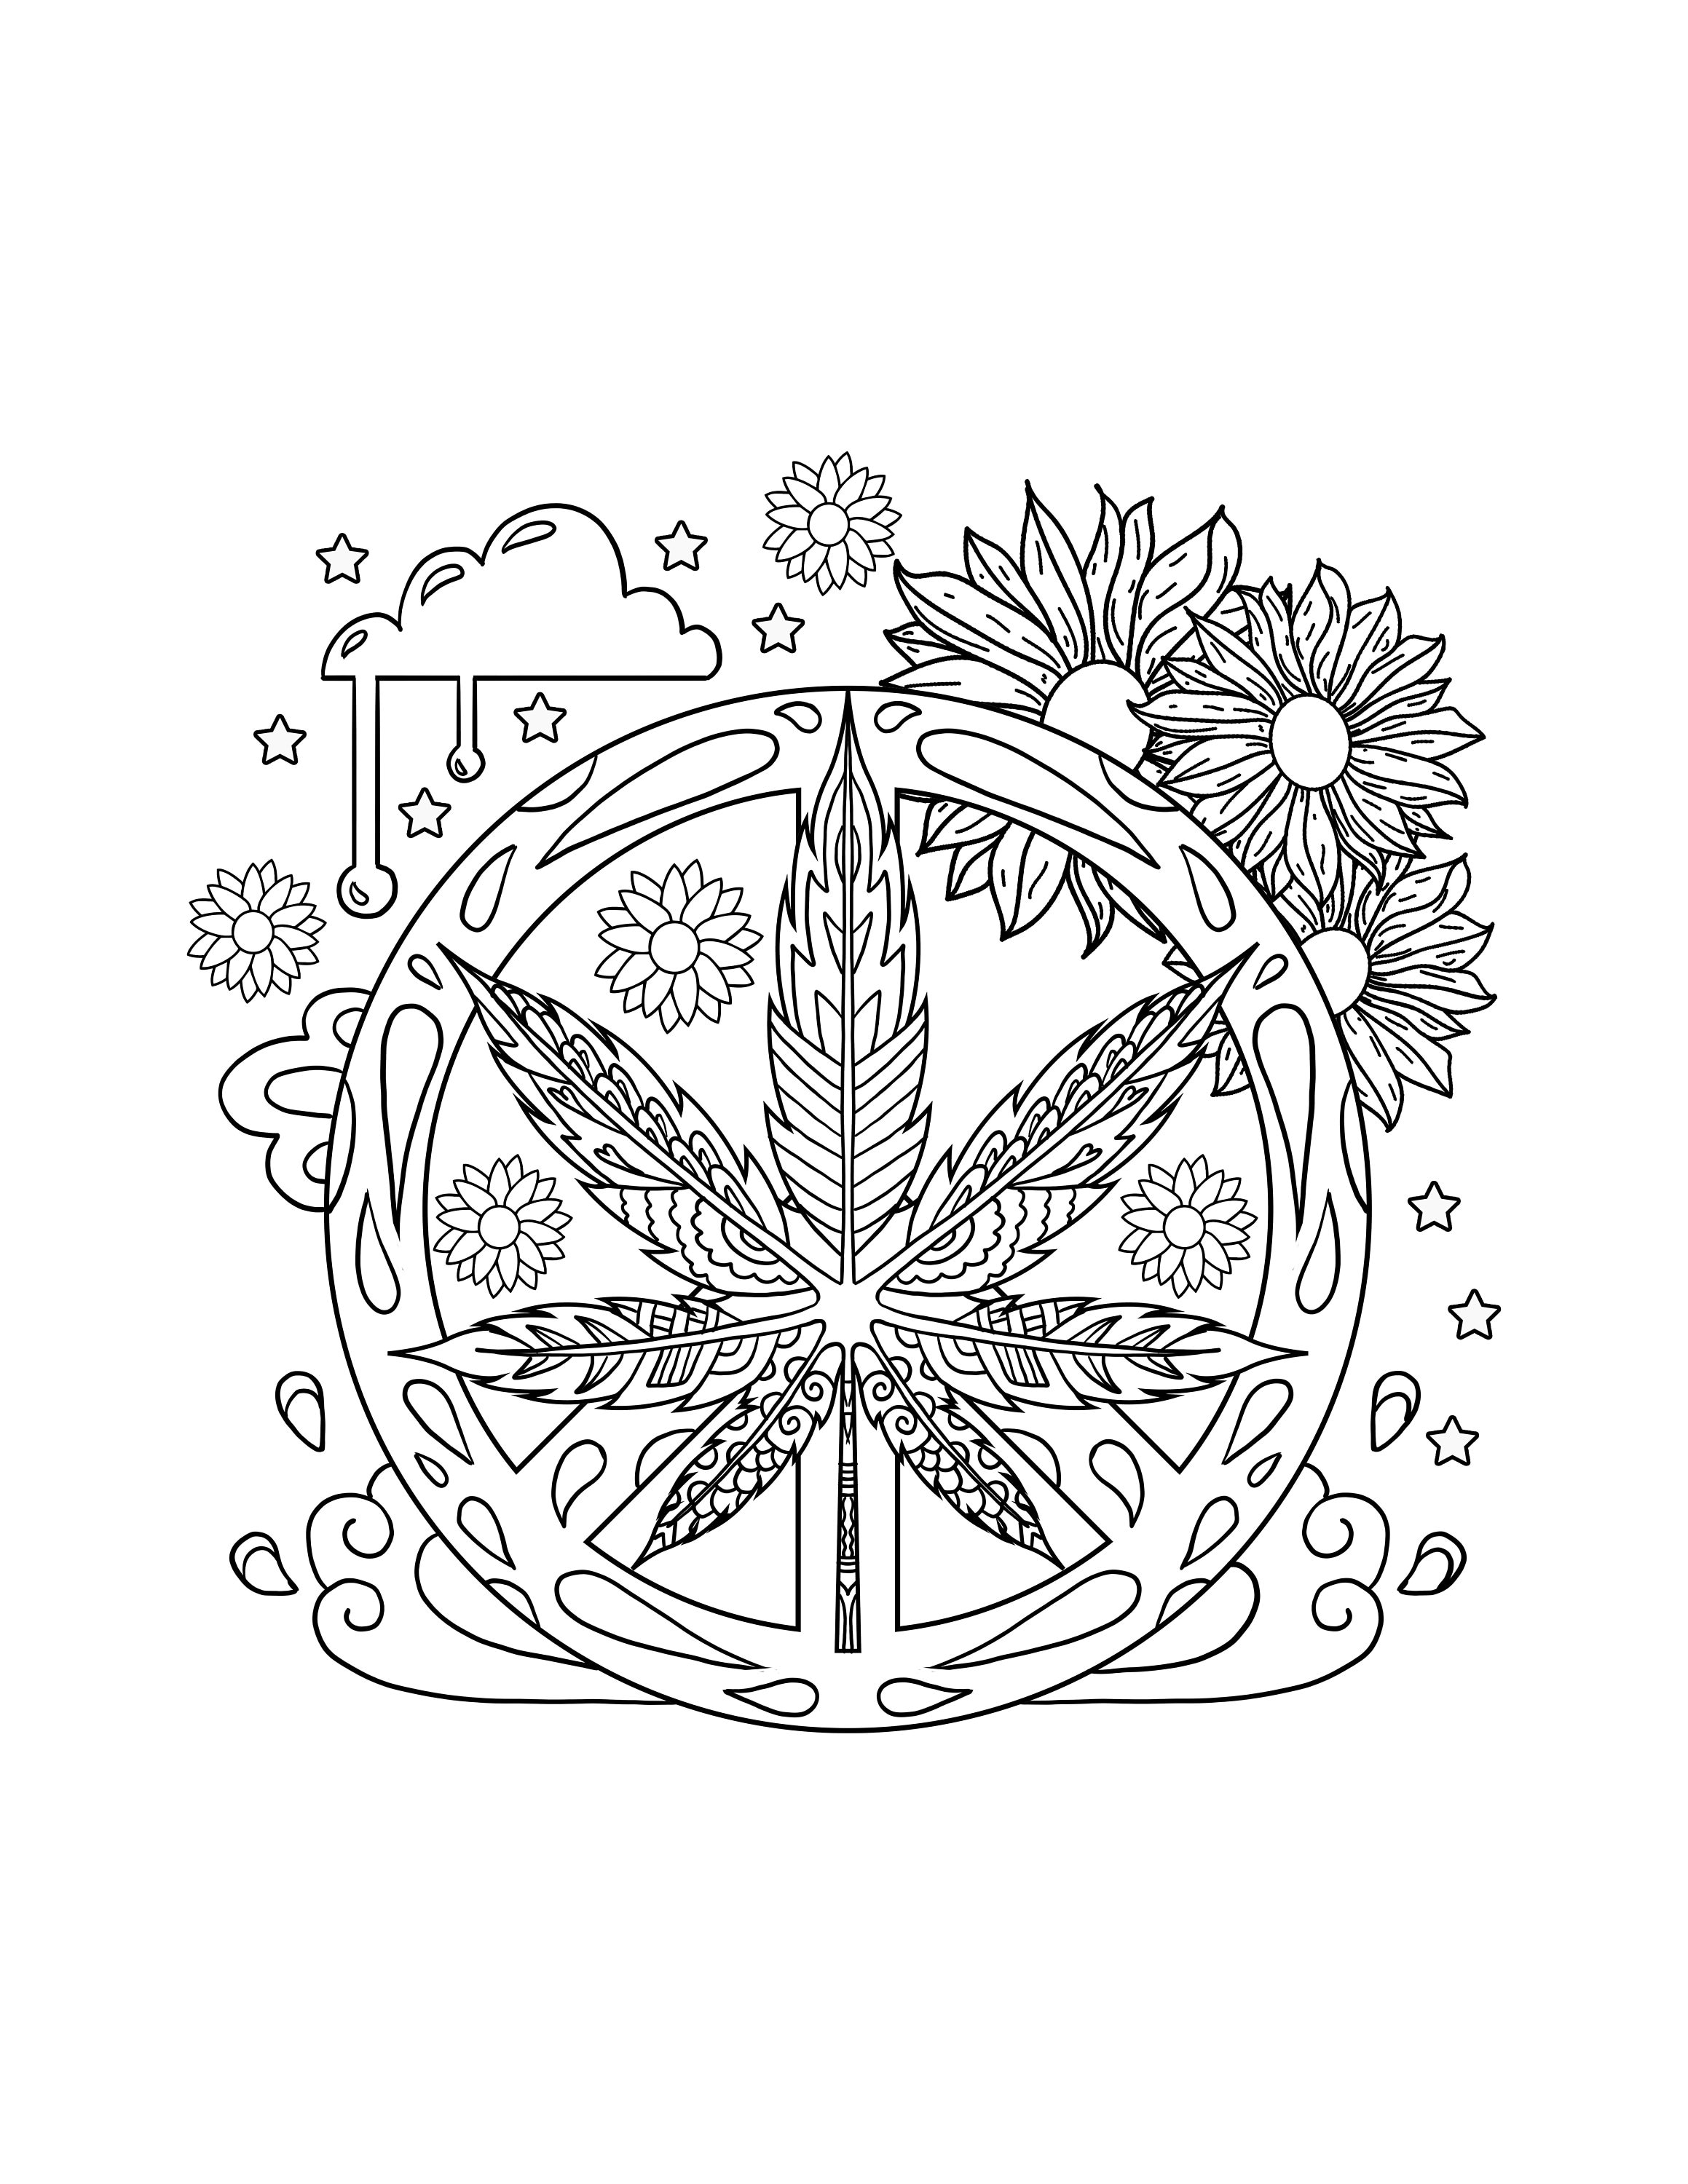 Weed coloring page